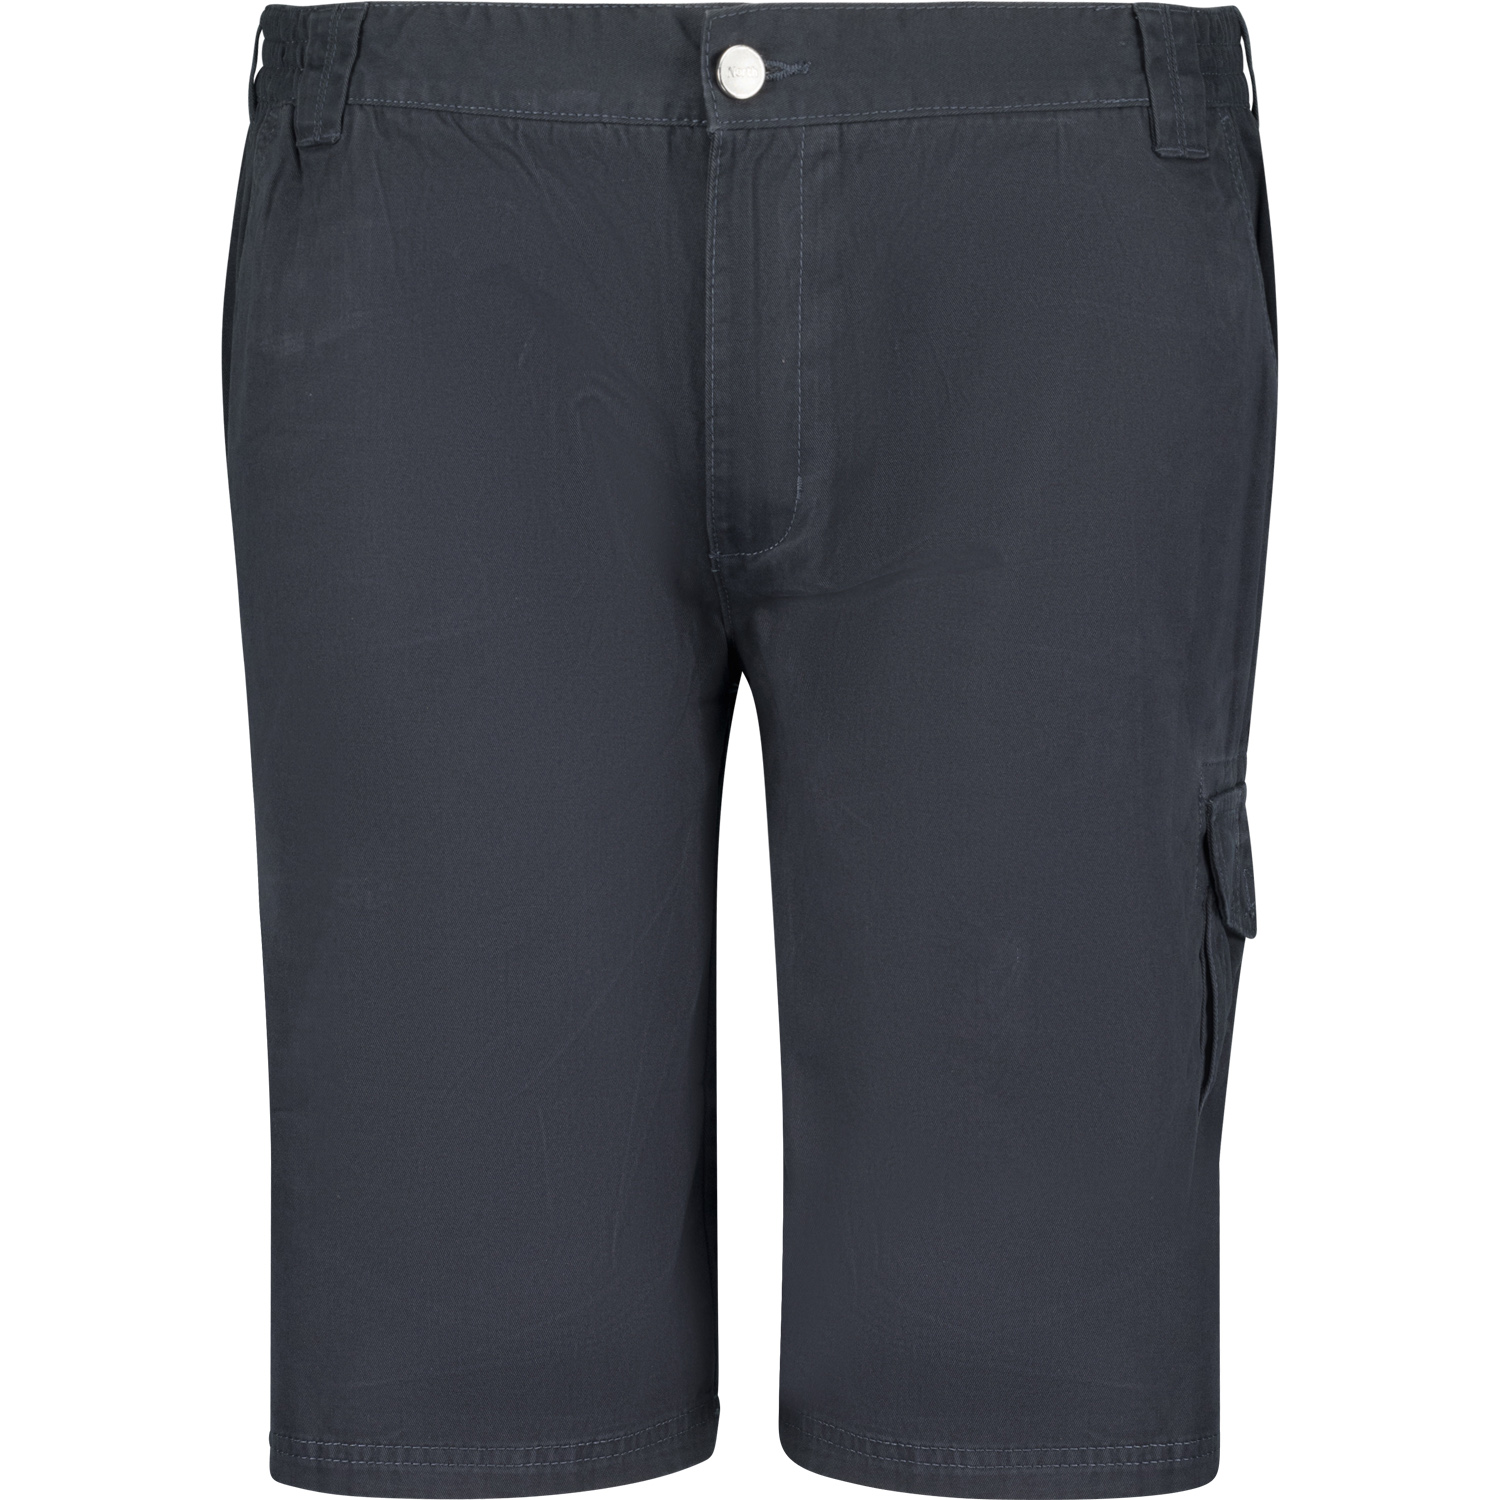 Navy cargo shorts by North 56°4 in oversizes up to 8XL